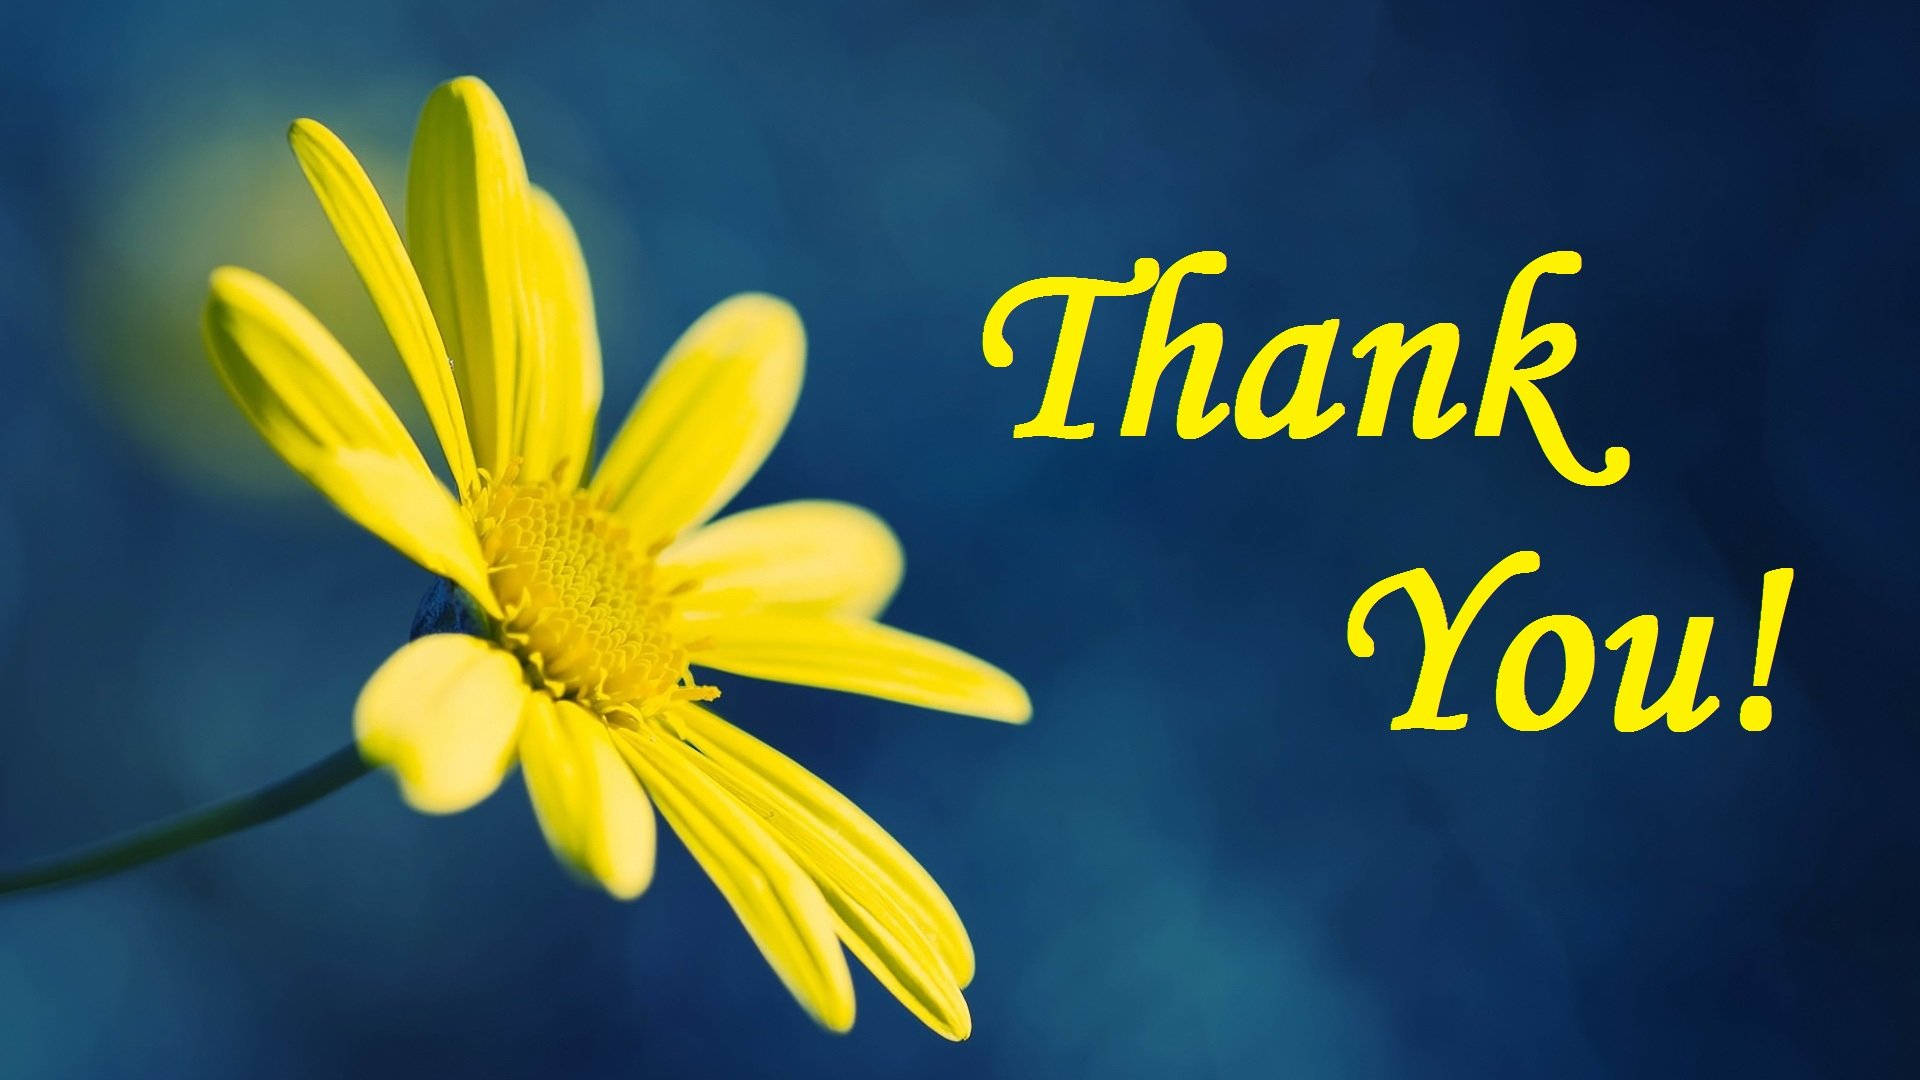 Thank You With Yellow Flower